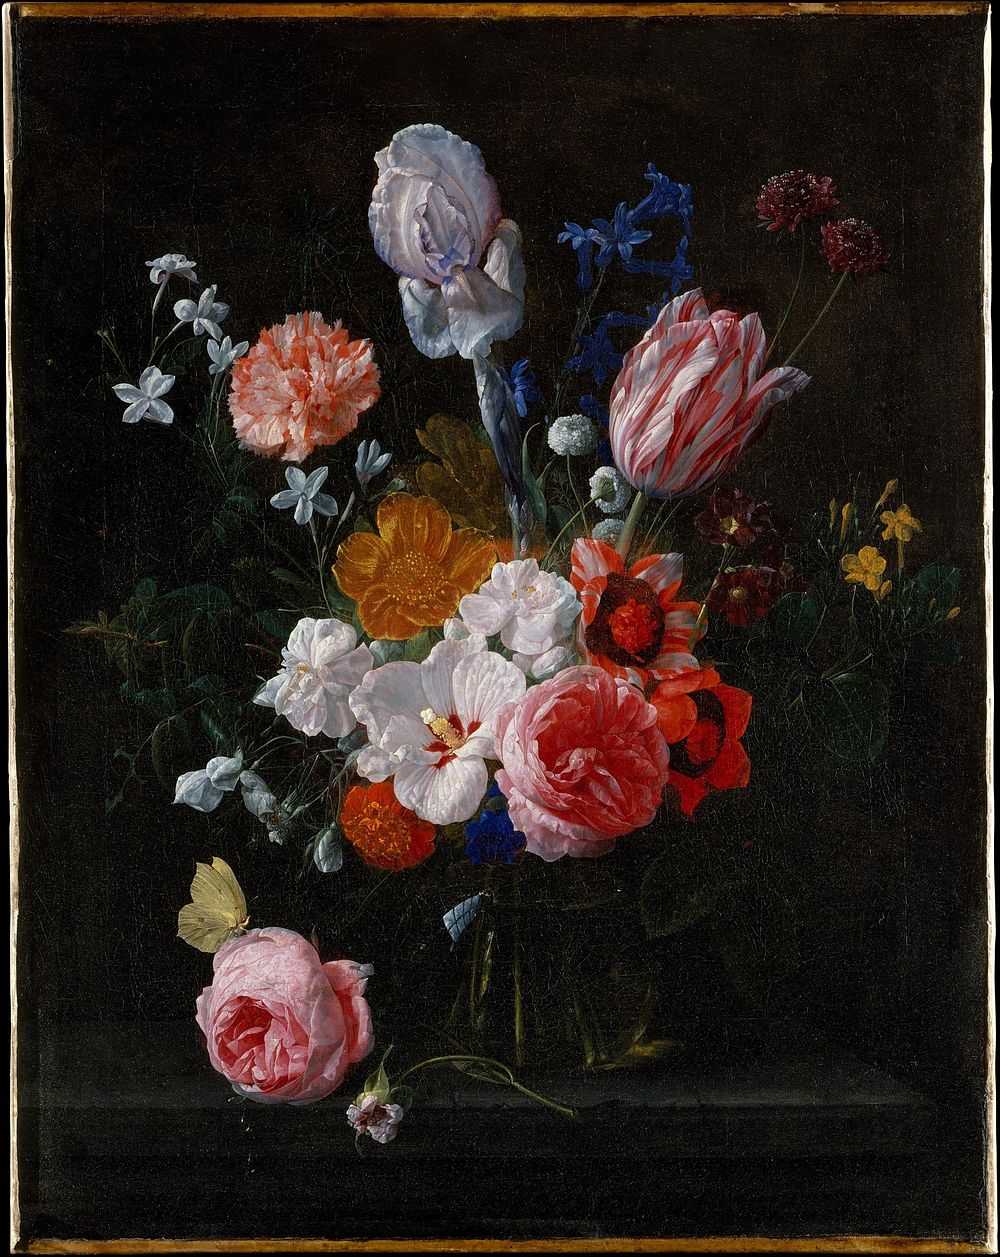 A Bouquet of Flowers in a Crystal Vase. Original public domain image from The MET Museum